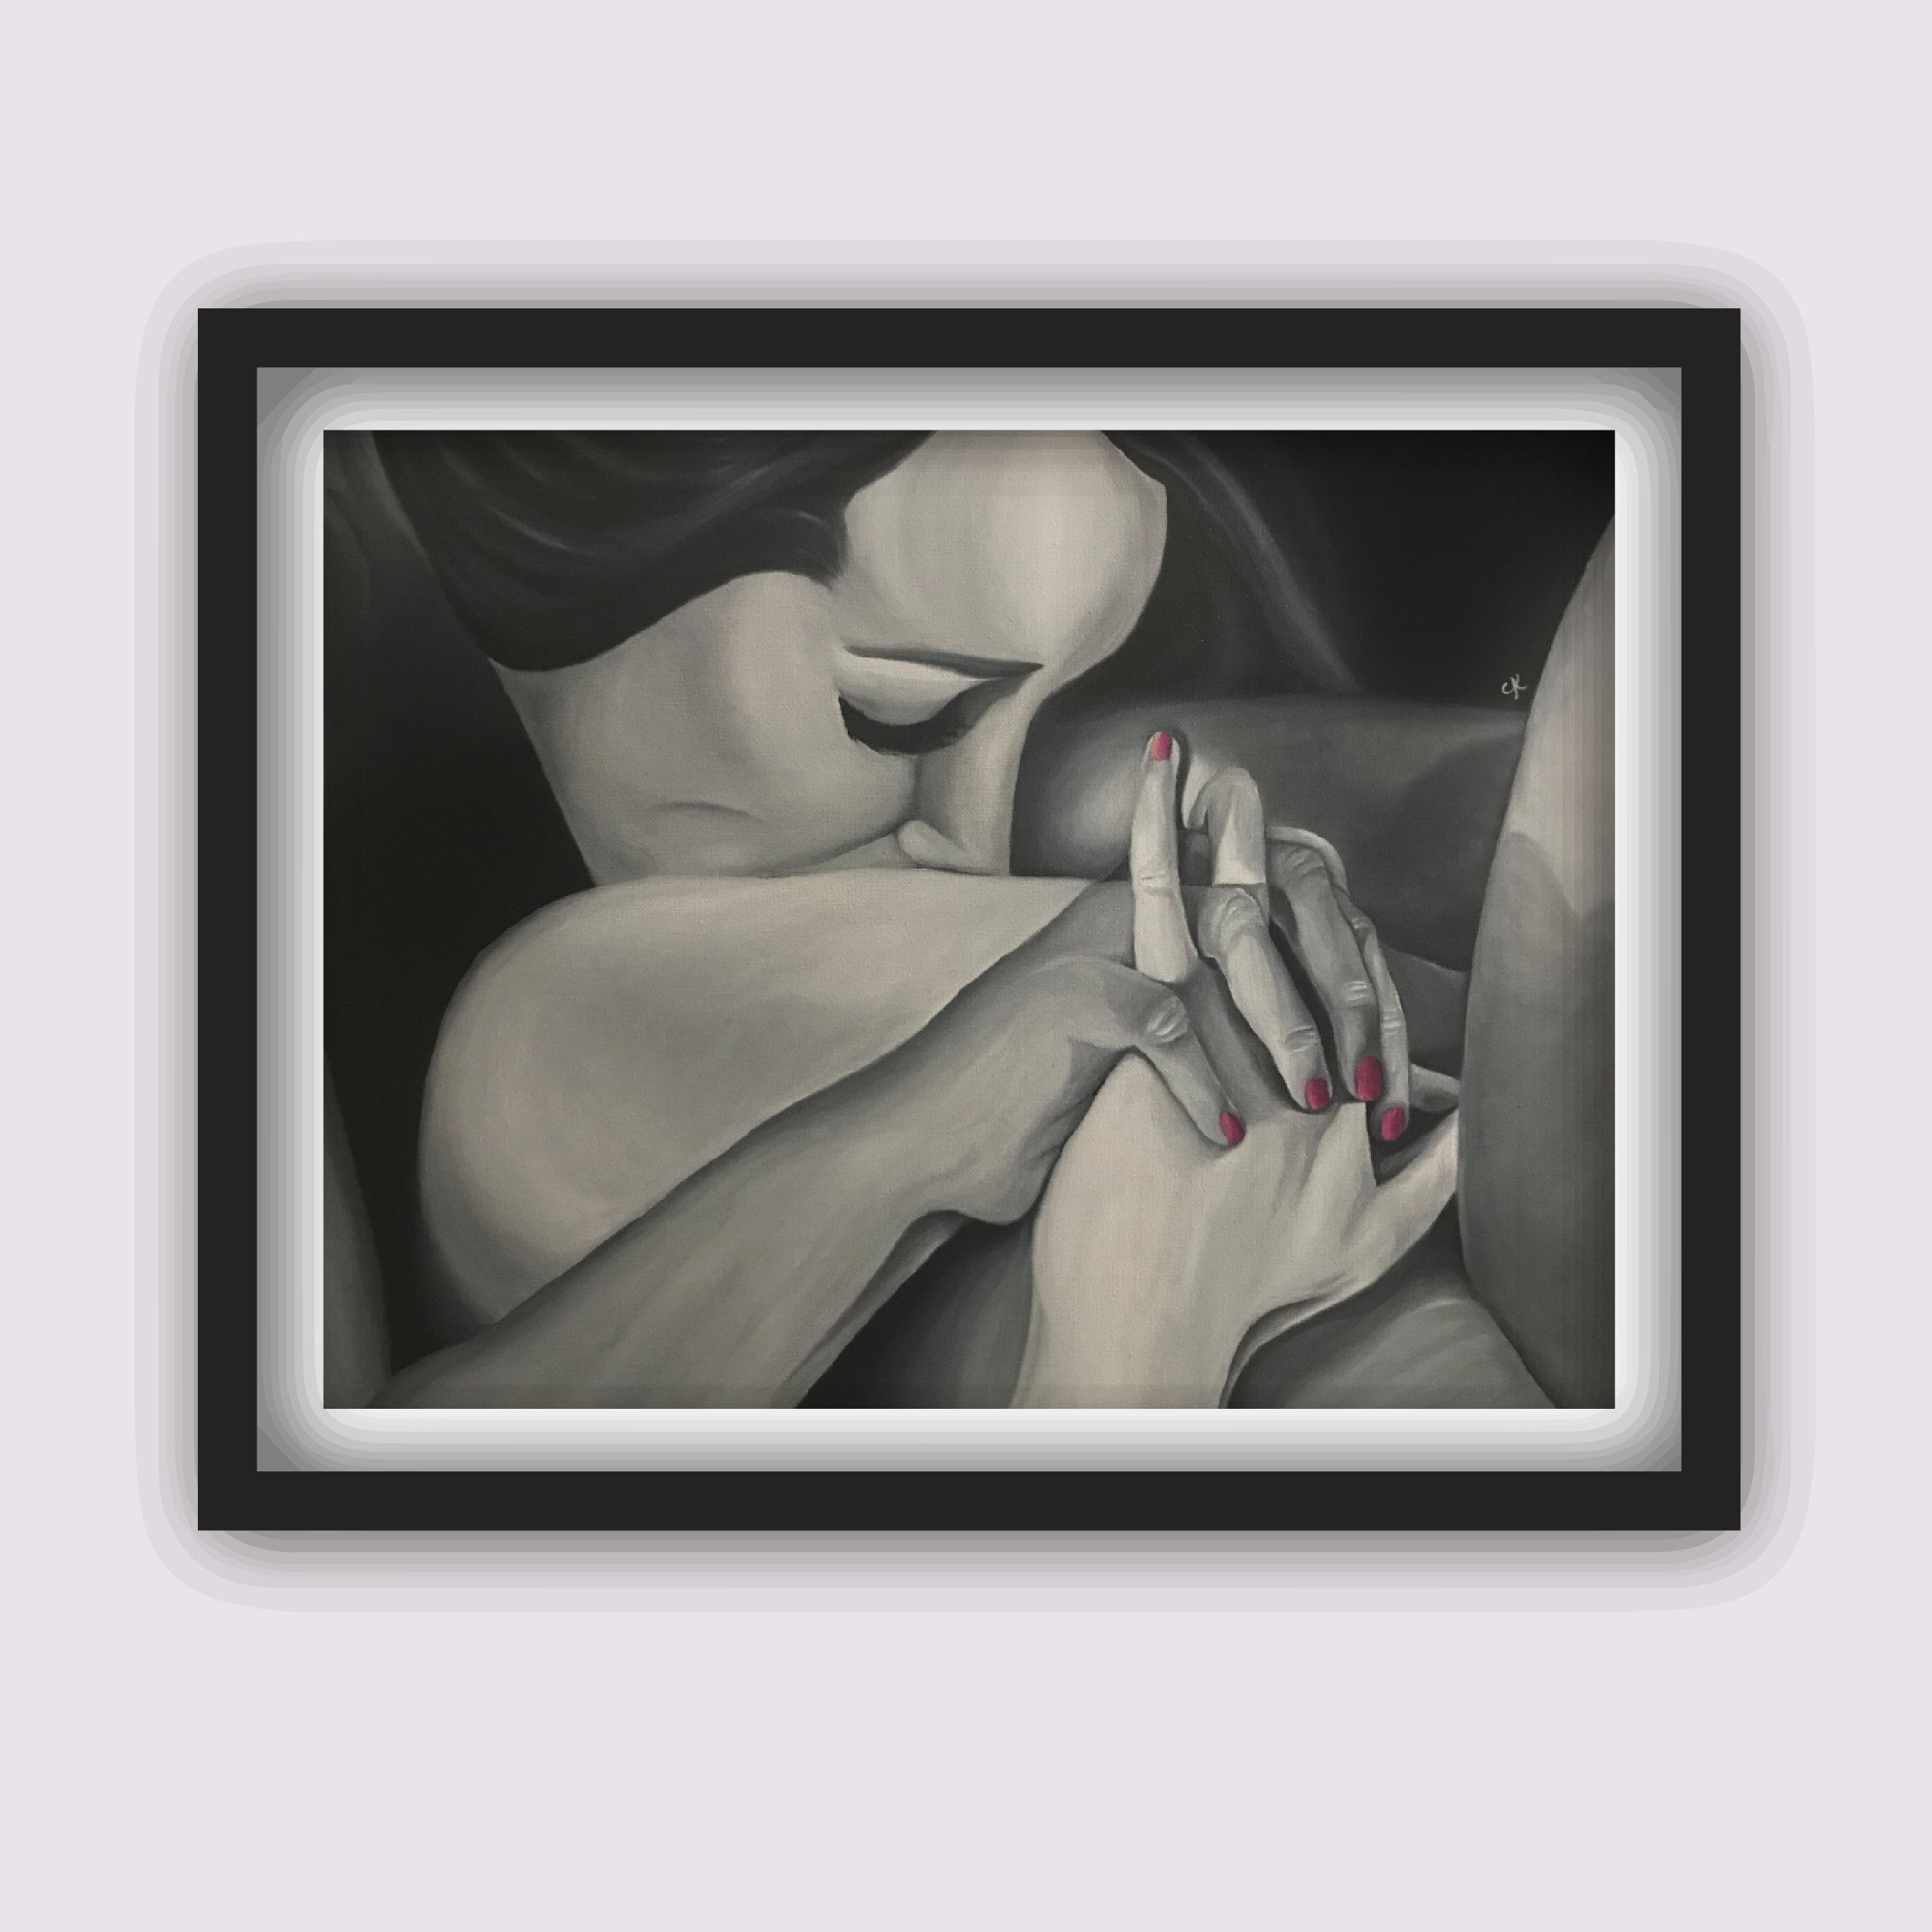 Intertwined Erotic Lesbian Oil Painting Art Print Available